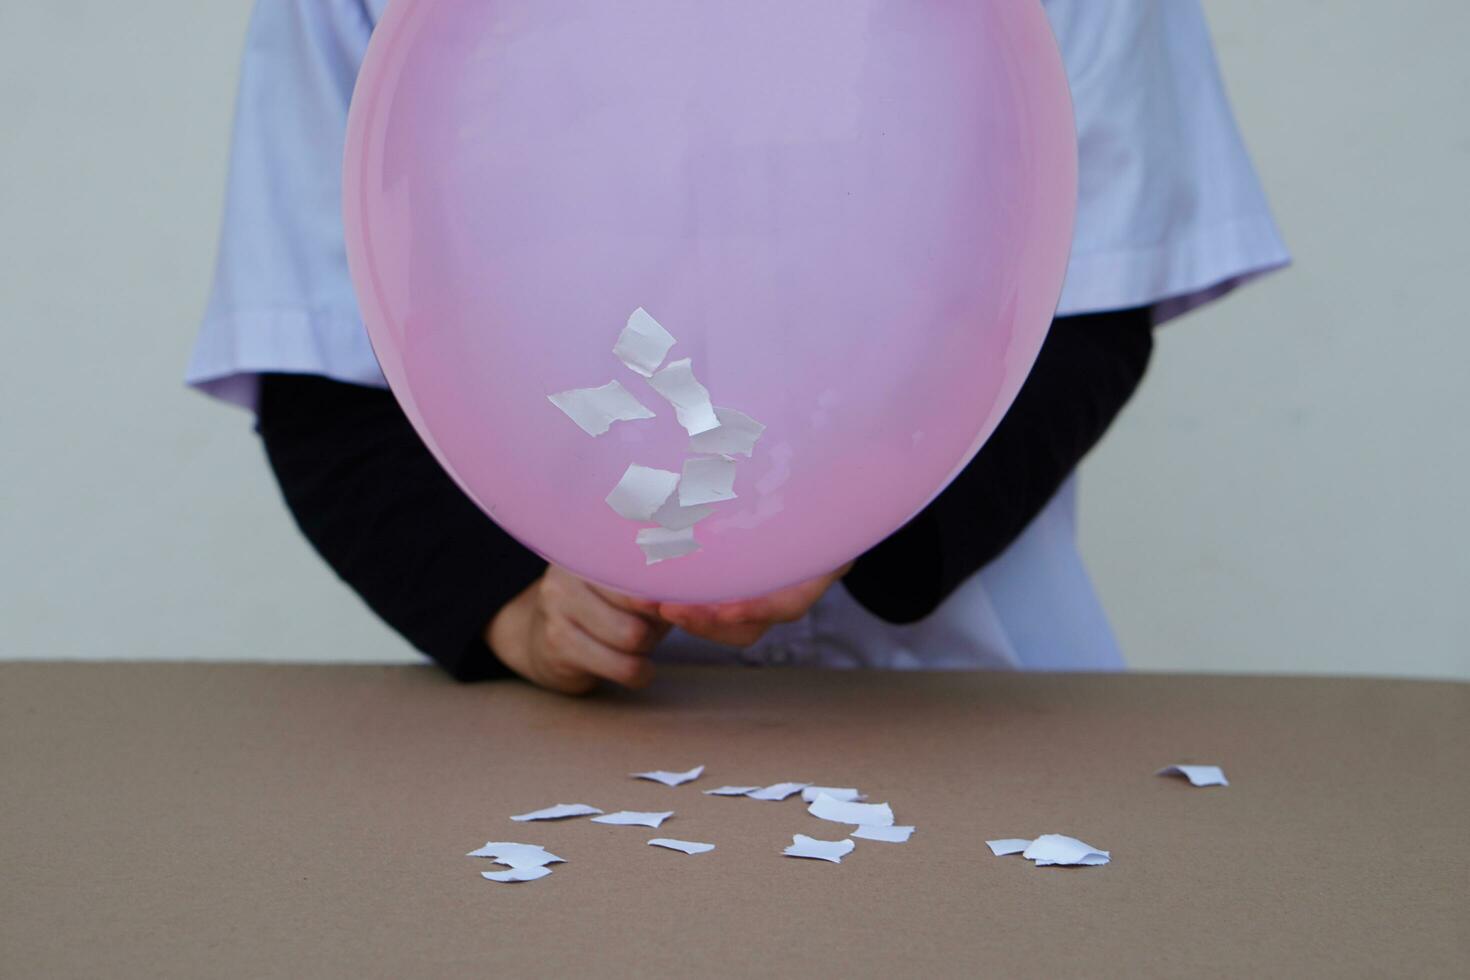 Closeup student do science experiment about static electricty from pink balloon and pieces of paper. Concept, Science project work activity. Learning by doing. Education. photo